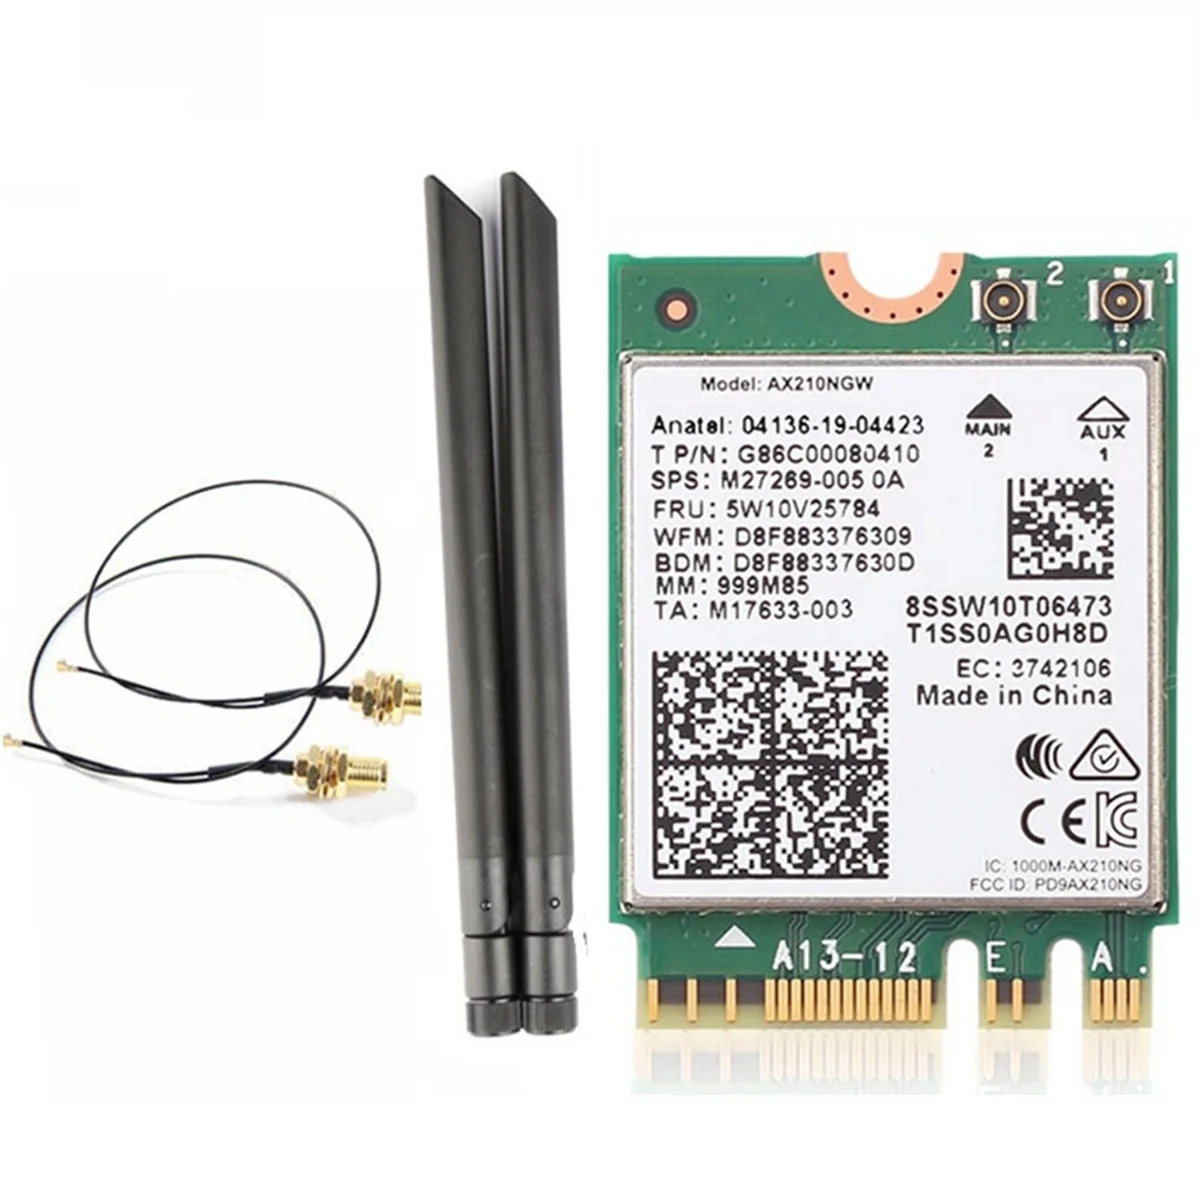 

AX210NGW WIFI6E WiFi Card 5374Mbps Tri-Band 2.4G/5G/6G Bluetooth 5.2 MU-MIMO Wireless Network Card with 8DB Antenna Kit